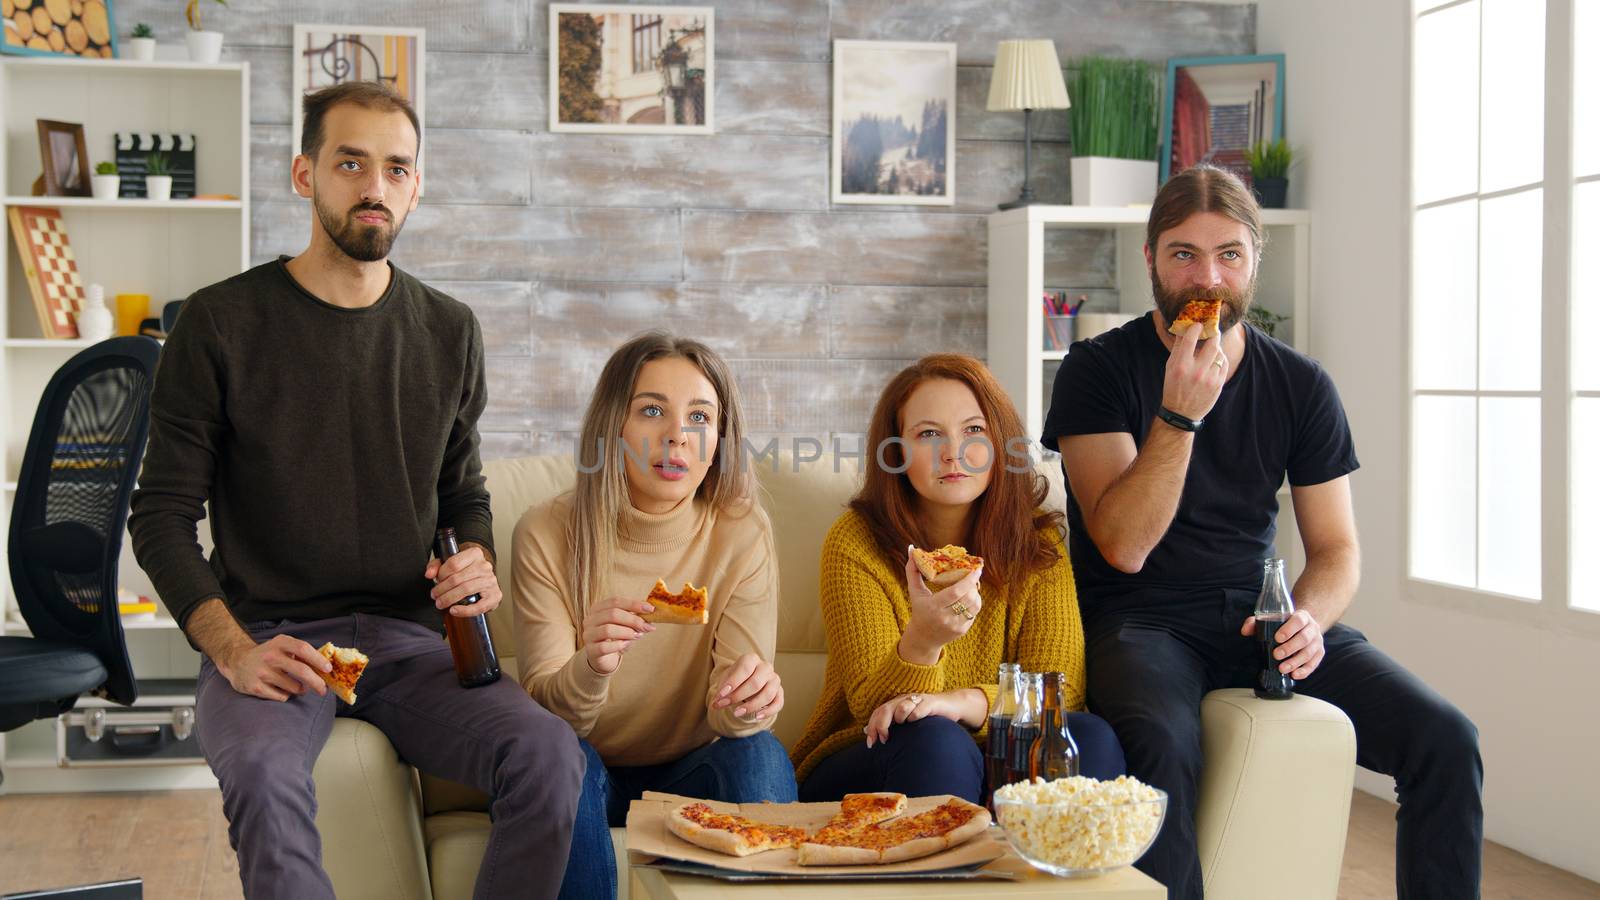 Young man and woman cheering up for their friends while playing video games sitting on couch. Pizza and popcorn.